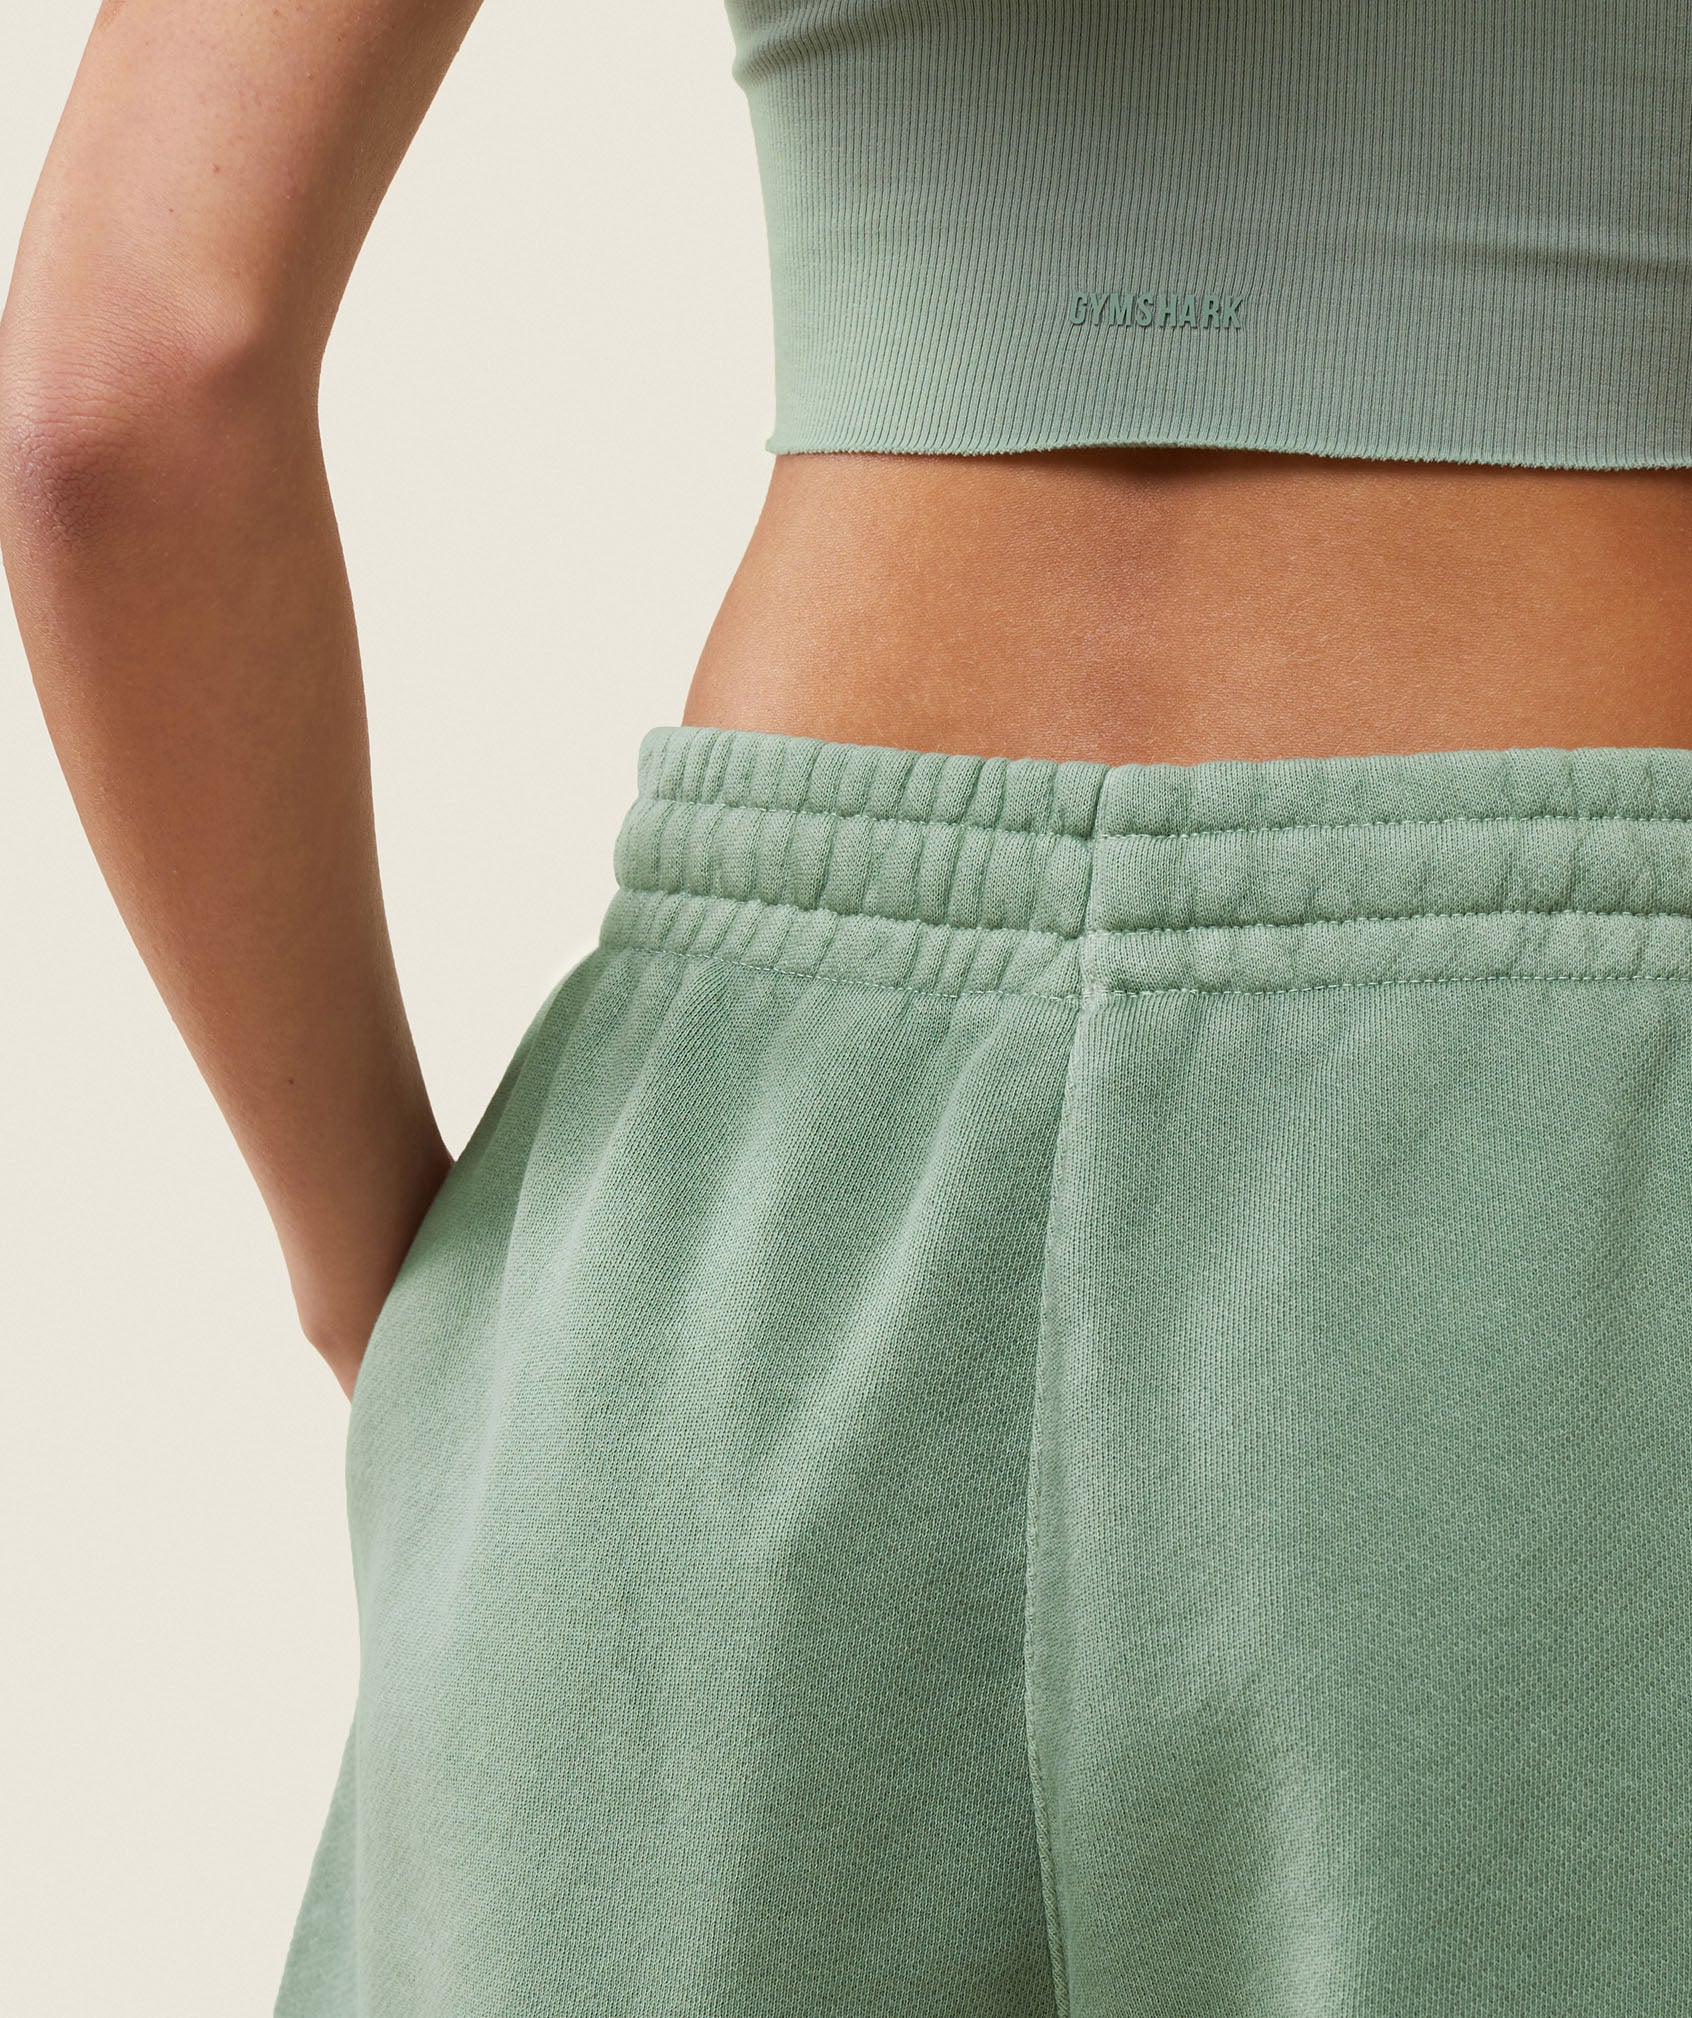 everywear Relaxed Sweat Shorts in Dollar Green - view 6